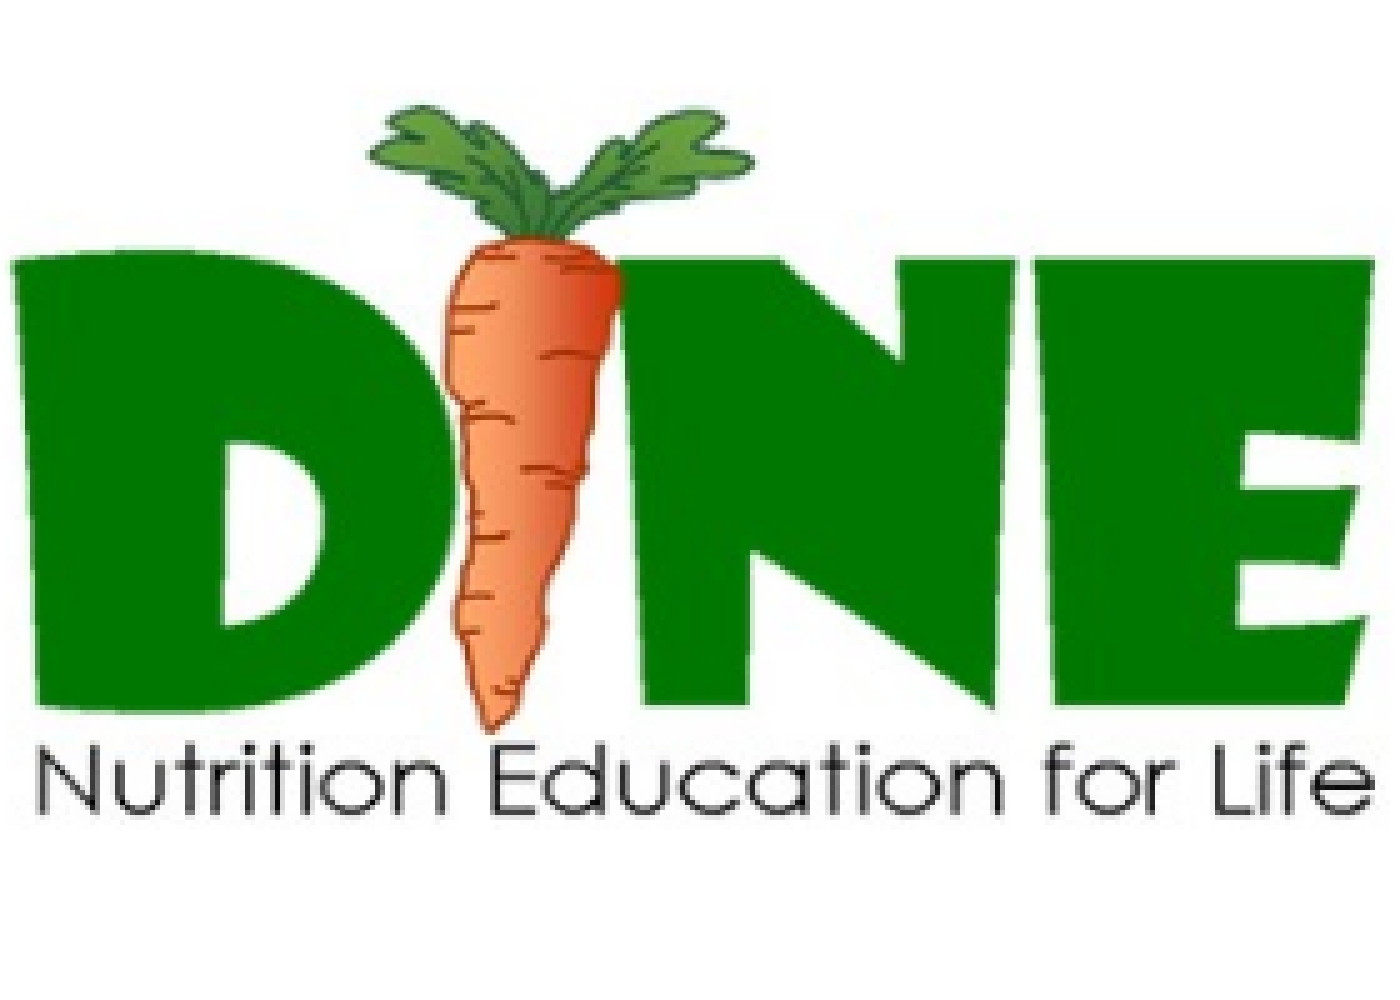 DINE (with the I made from a drawing of a carrot) Nutrition Education for Life